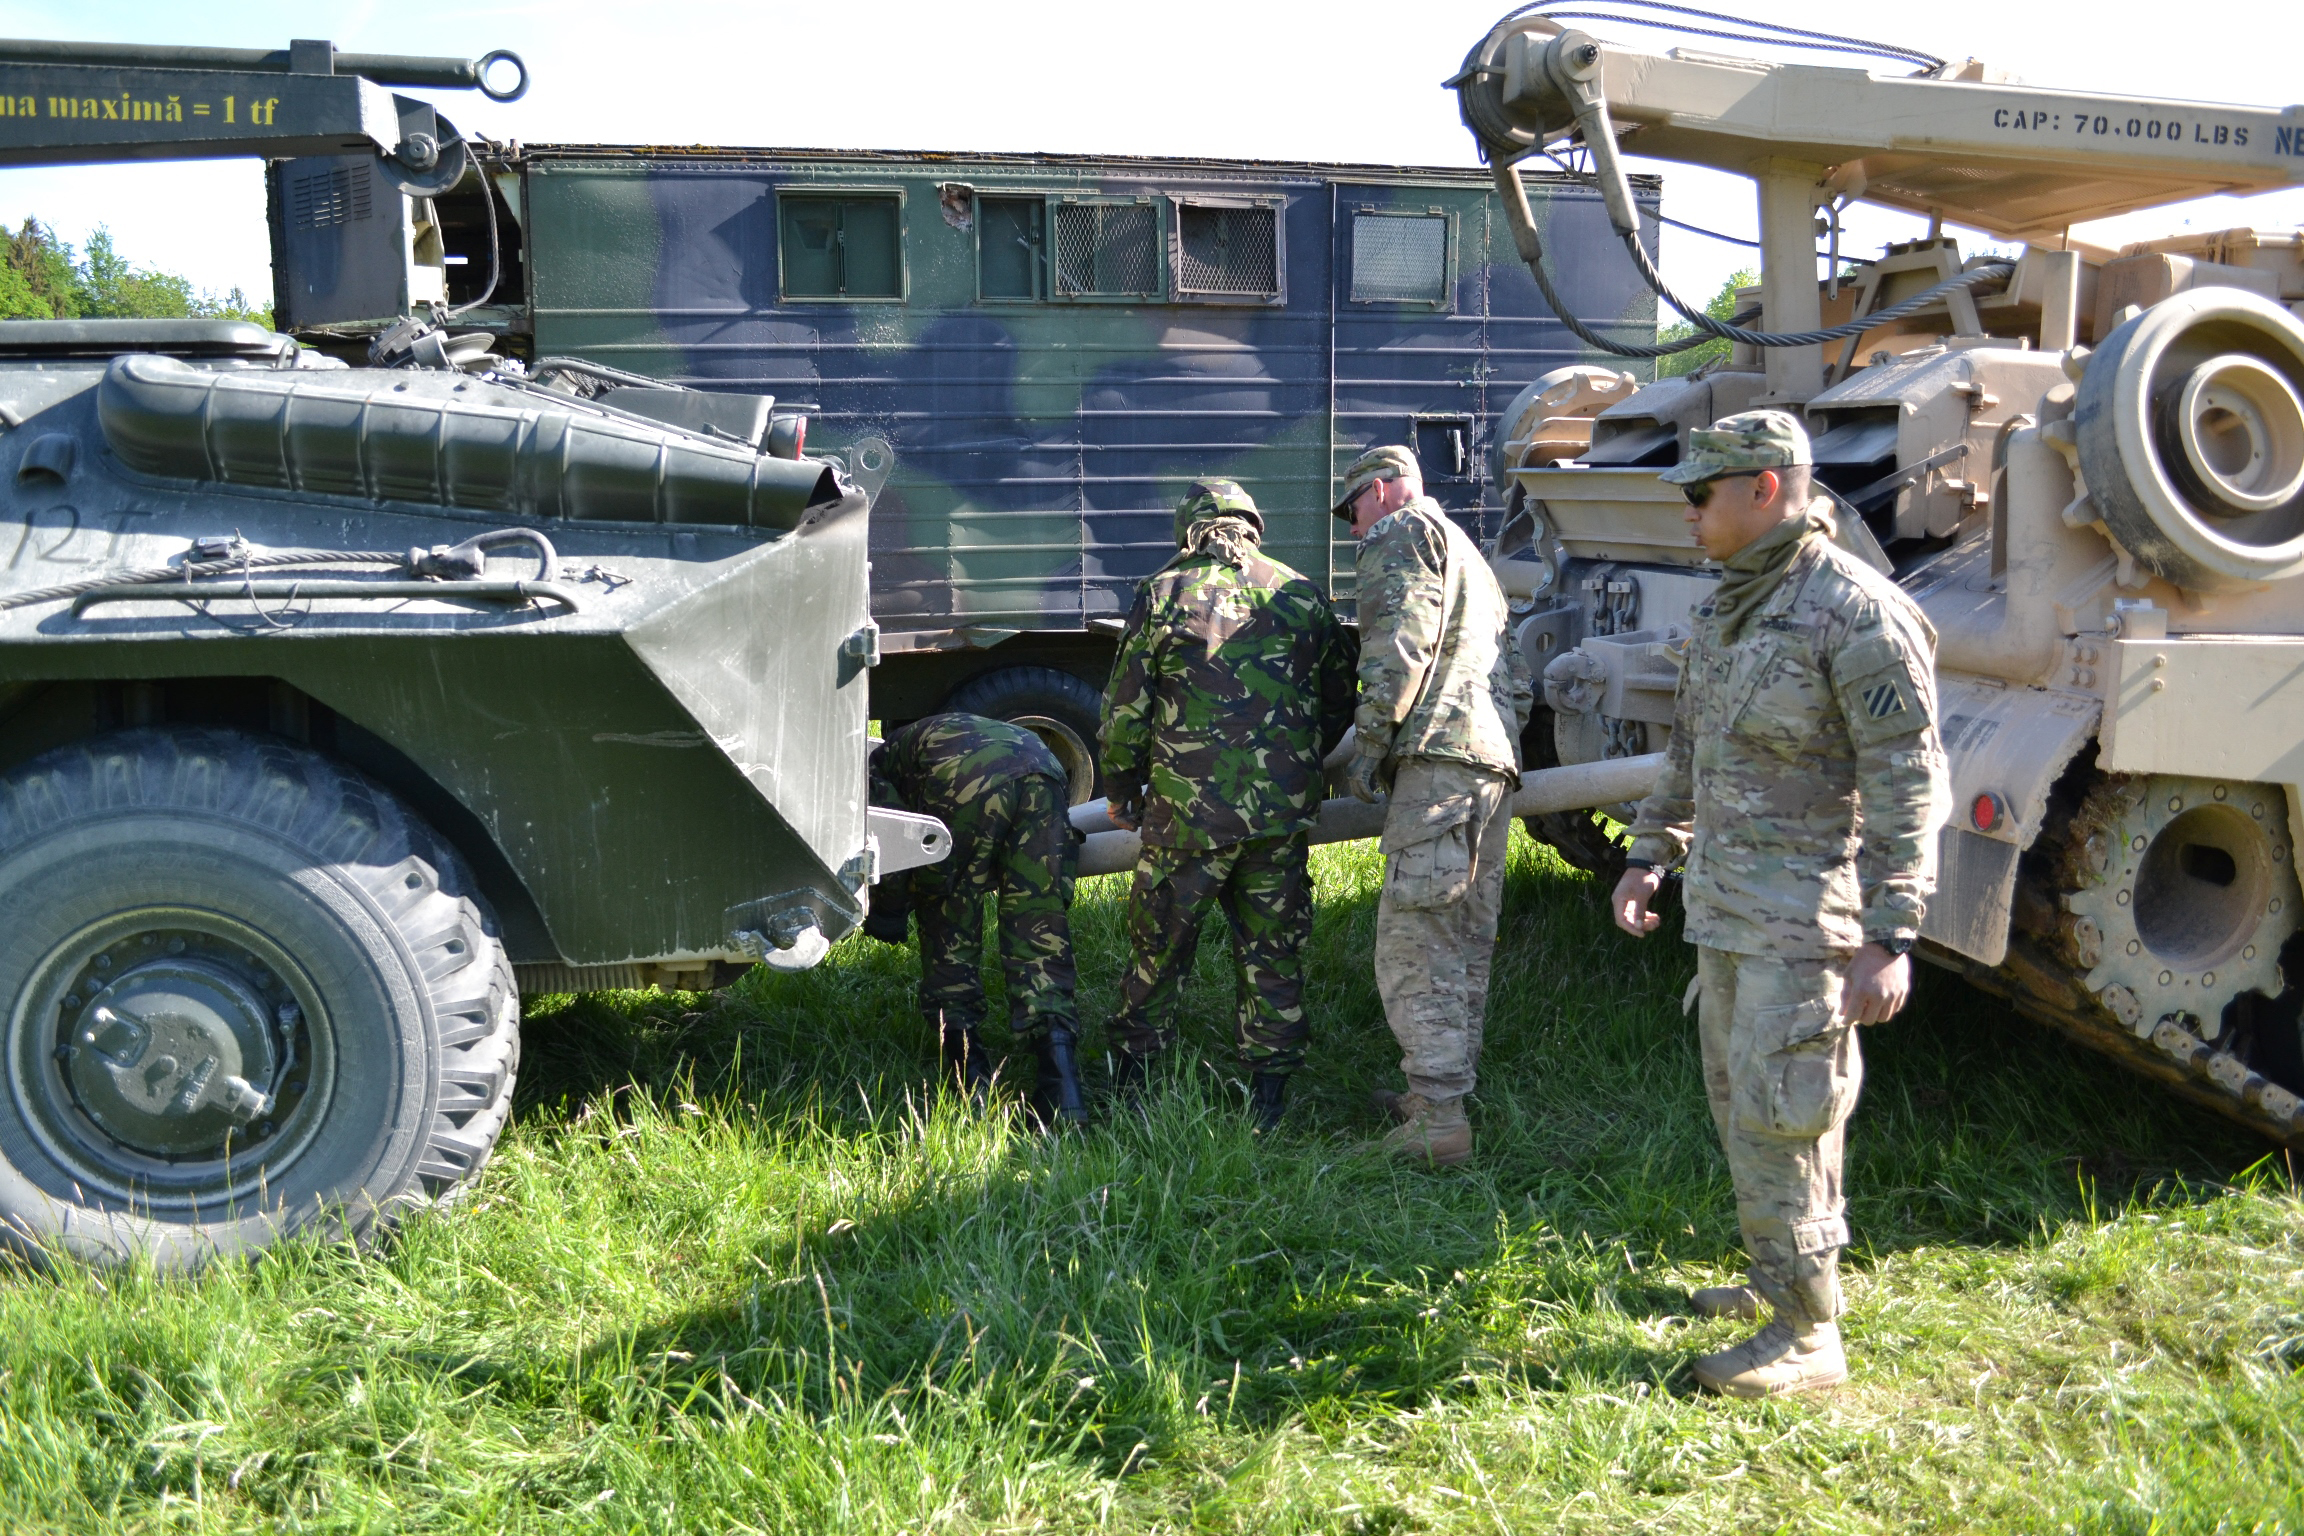 three military men in uniform standing near a military vehicle